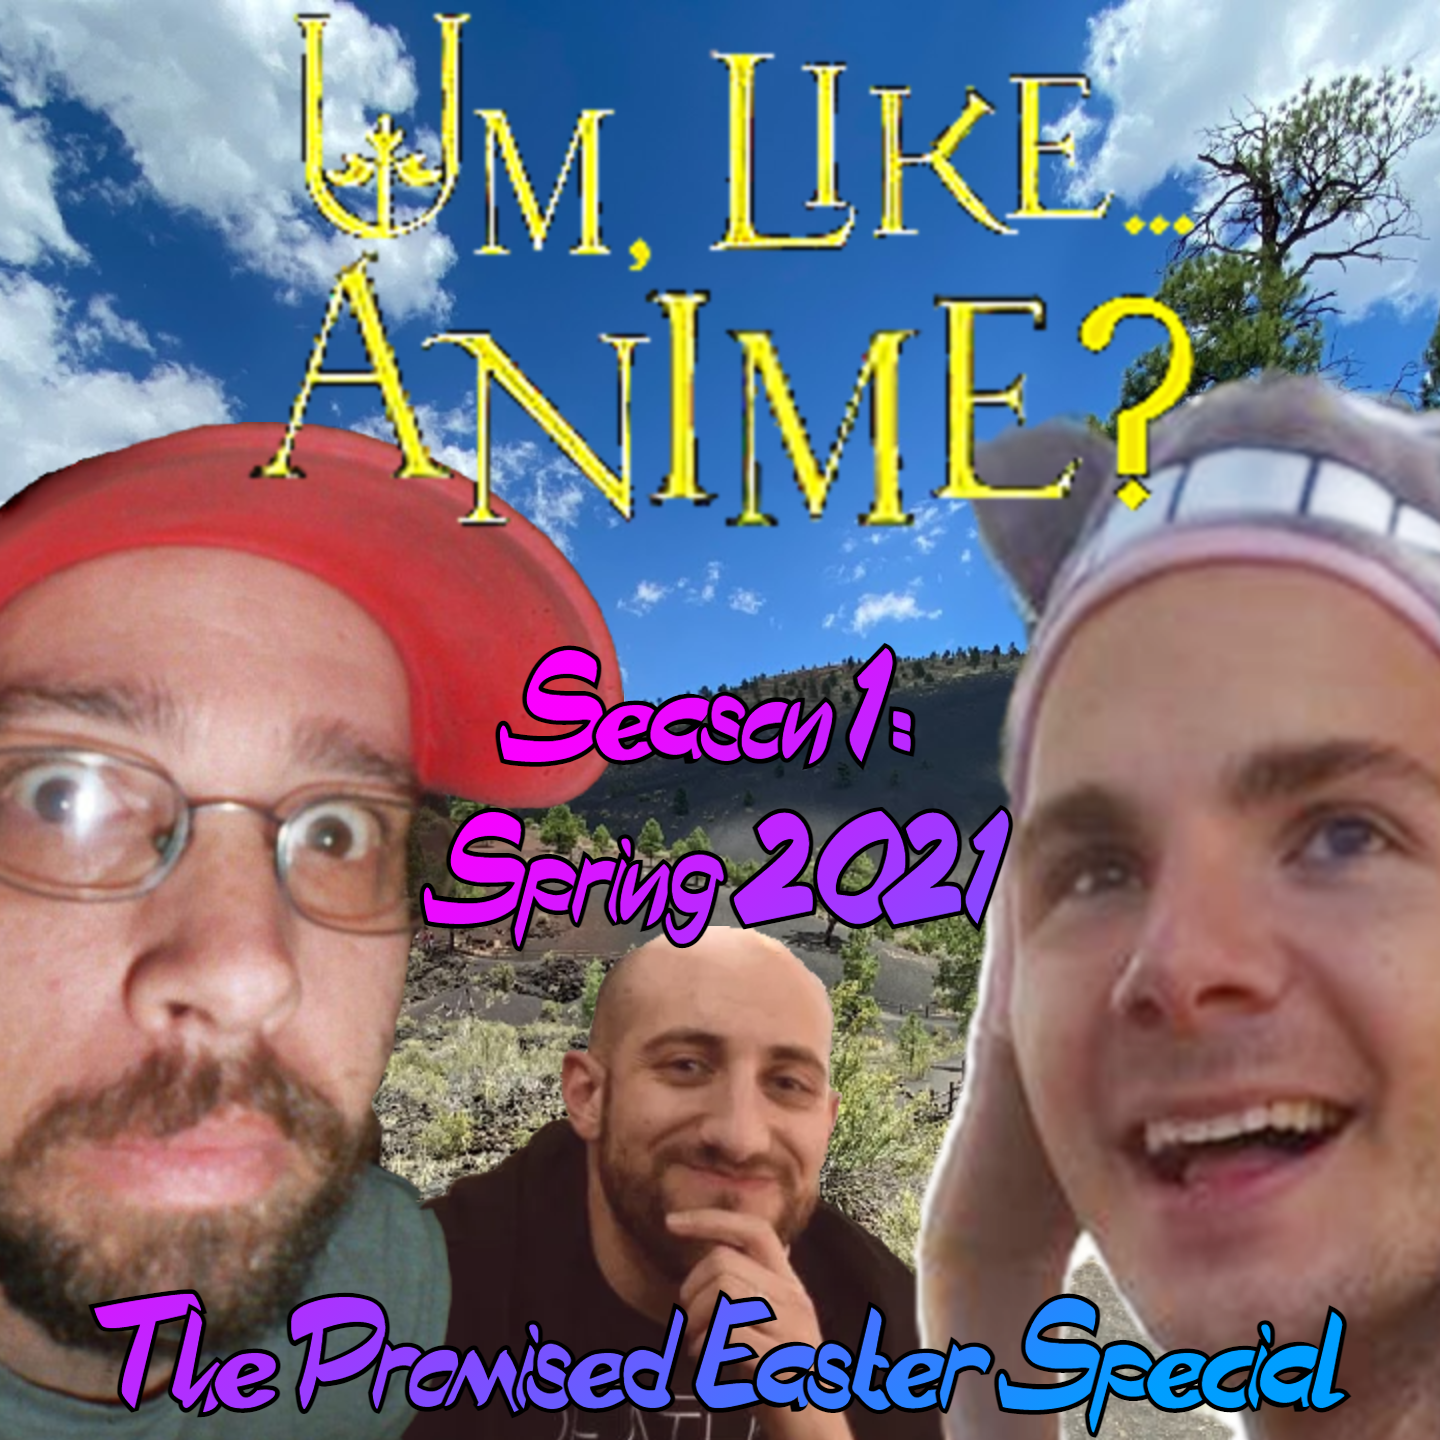 Season 1, Episode E: The Promised Easter Special